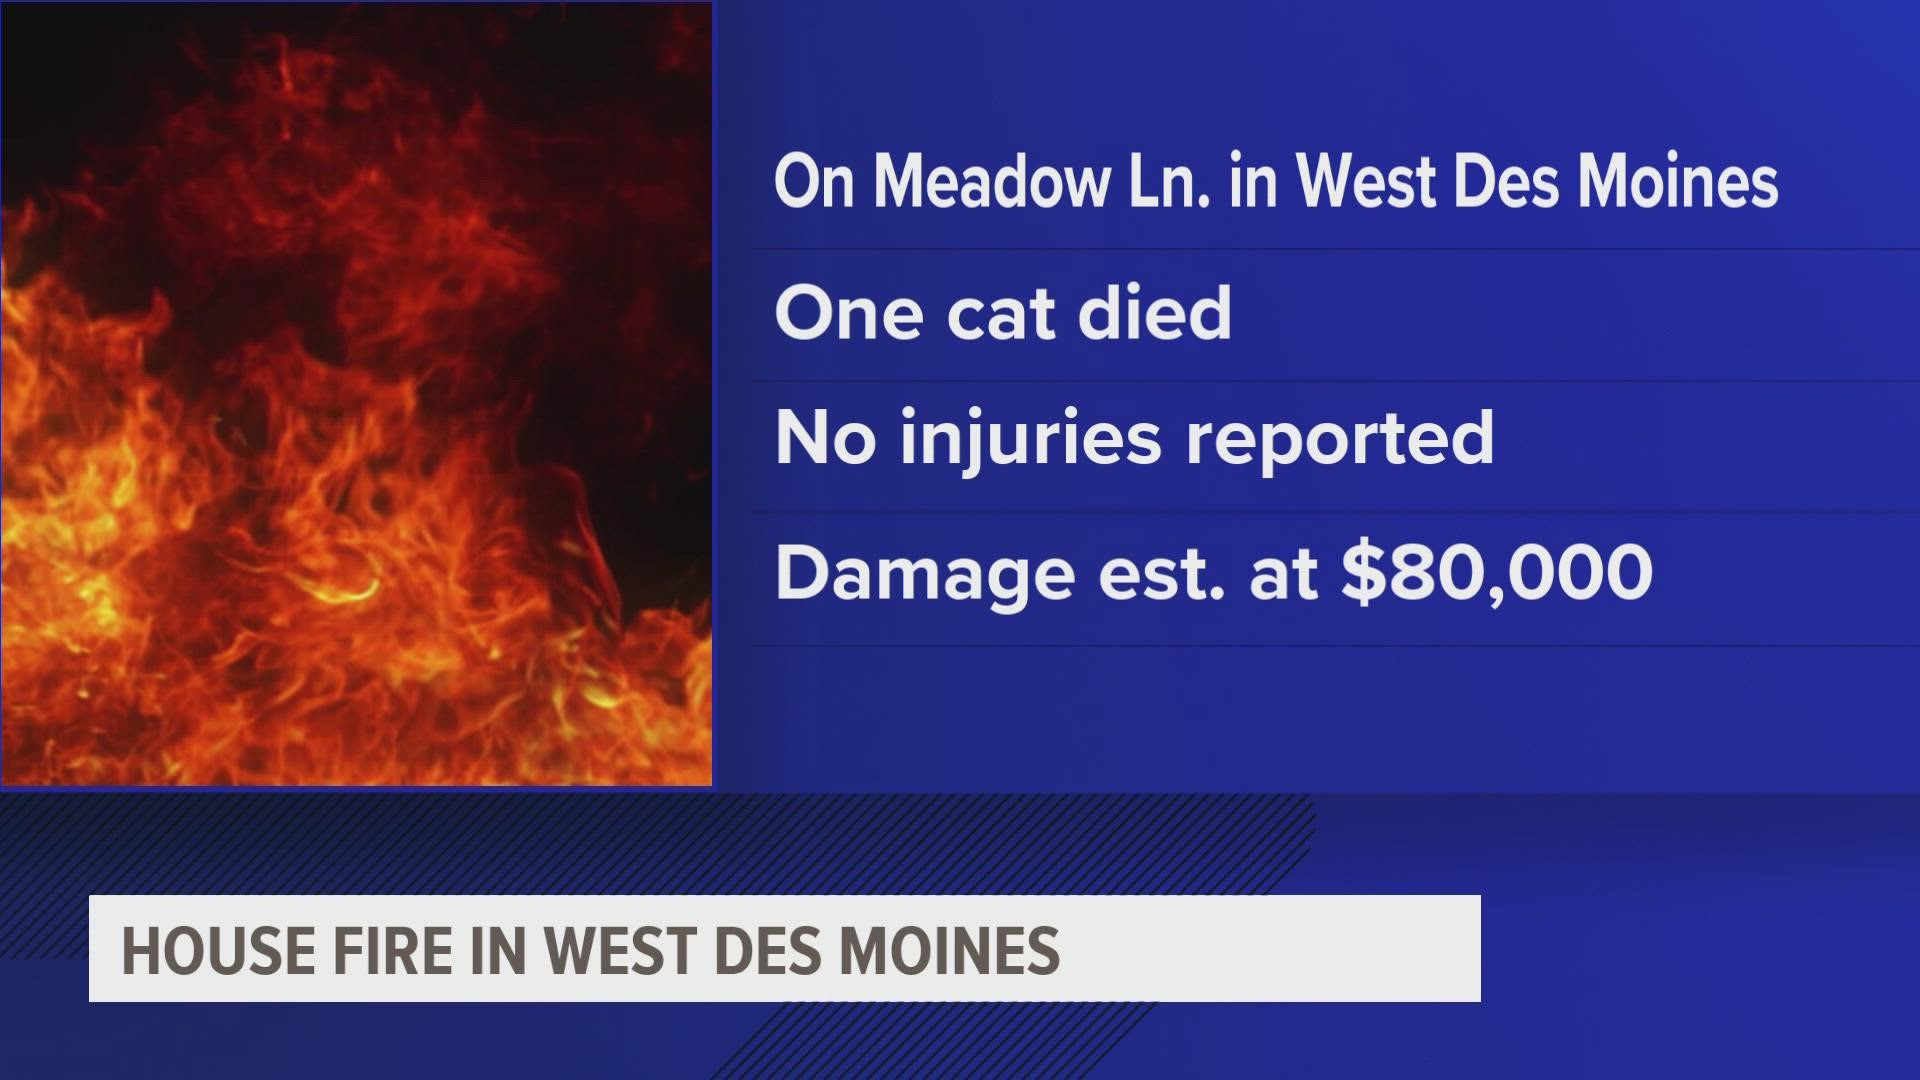 The exact cause of the fire is under investigation, according to West Des Moines Fire Department.